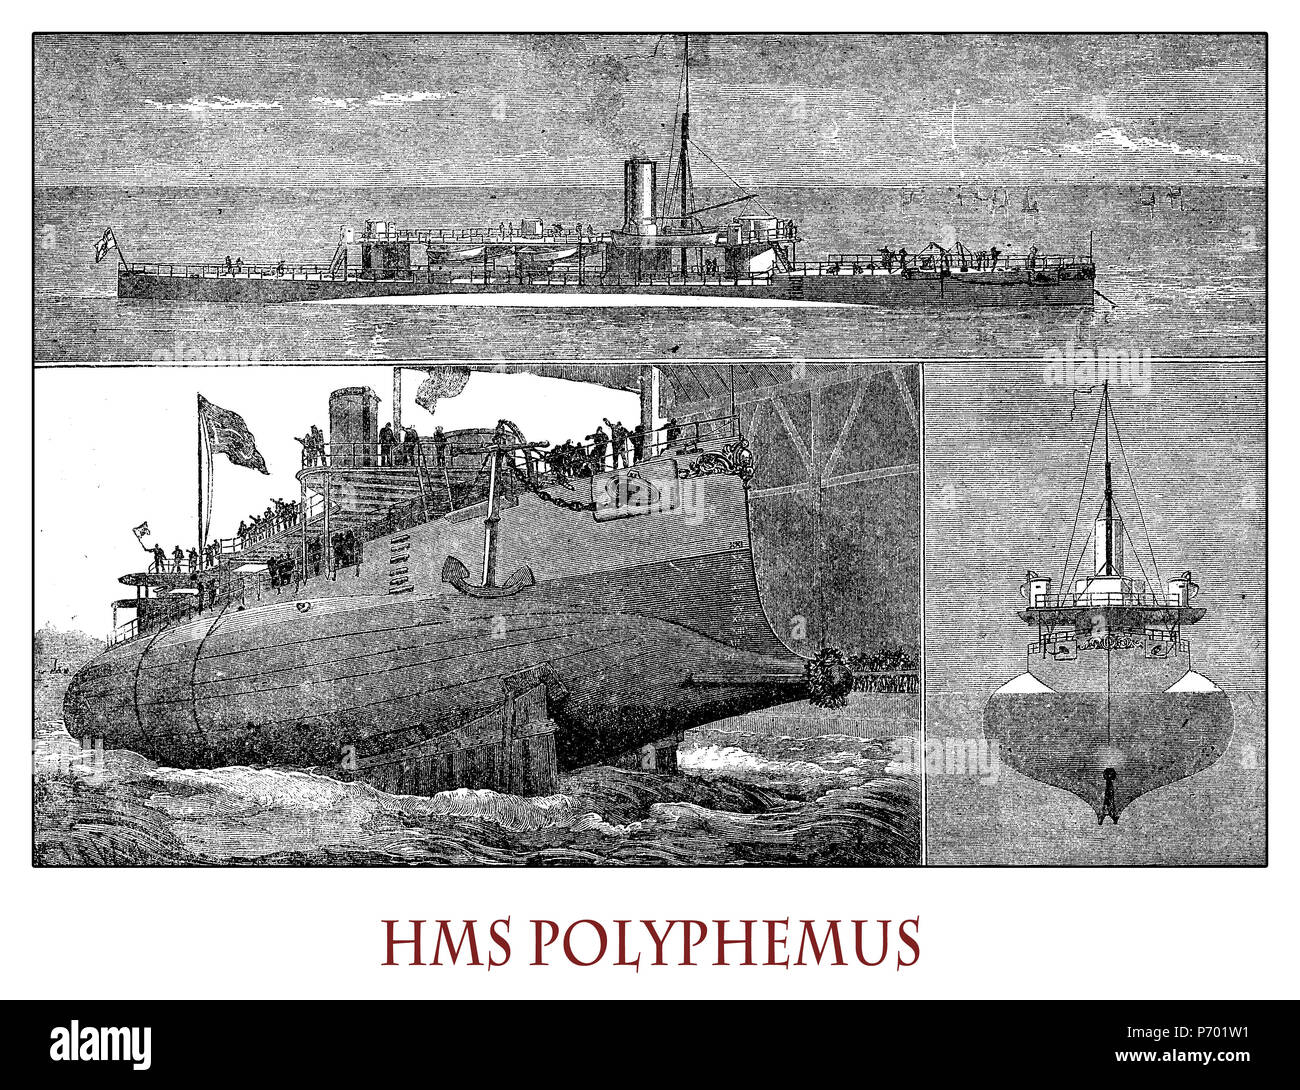 HMS Polyphemus was a British royal navy ironclad, torpedo ram  with torped tubes from 1881 used for coastal defence, litoral combat and to sink enemy anchored ships. Illustrations from a Swiss magazine of XIX century Stock Photo